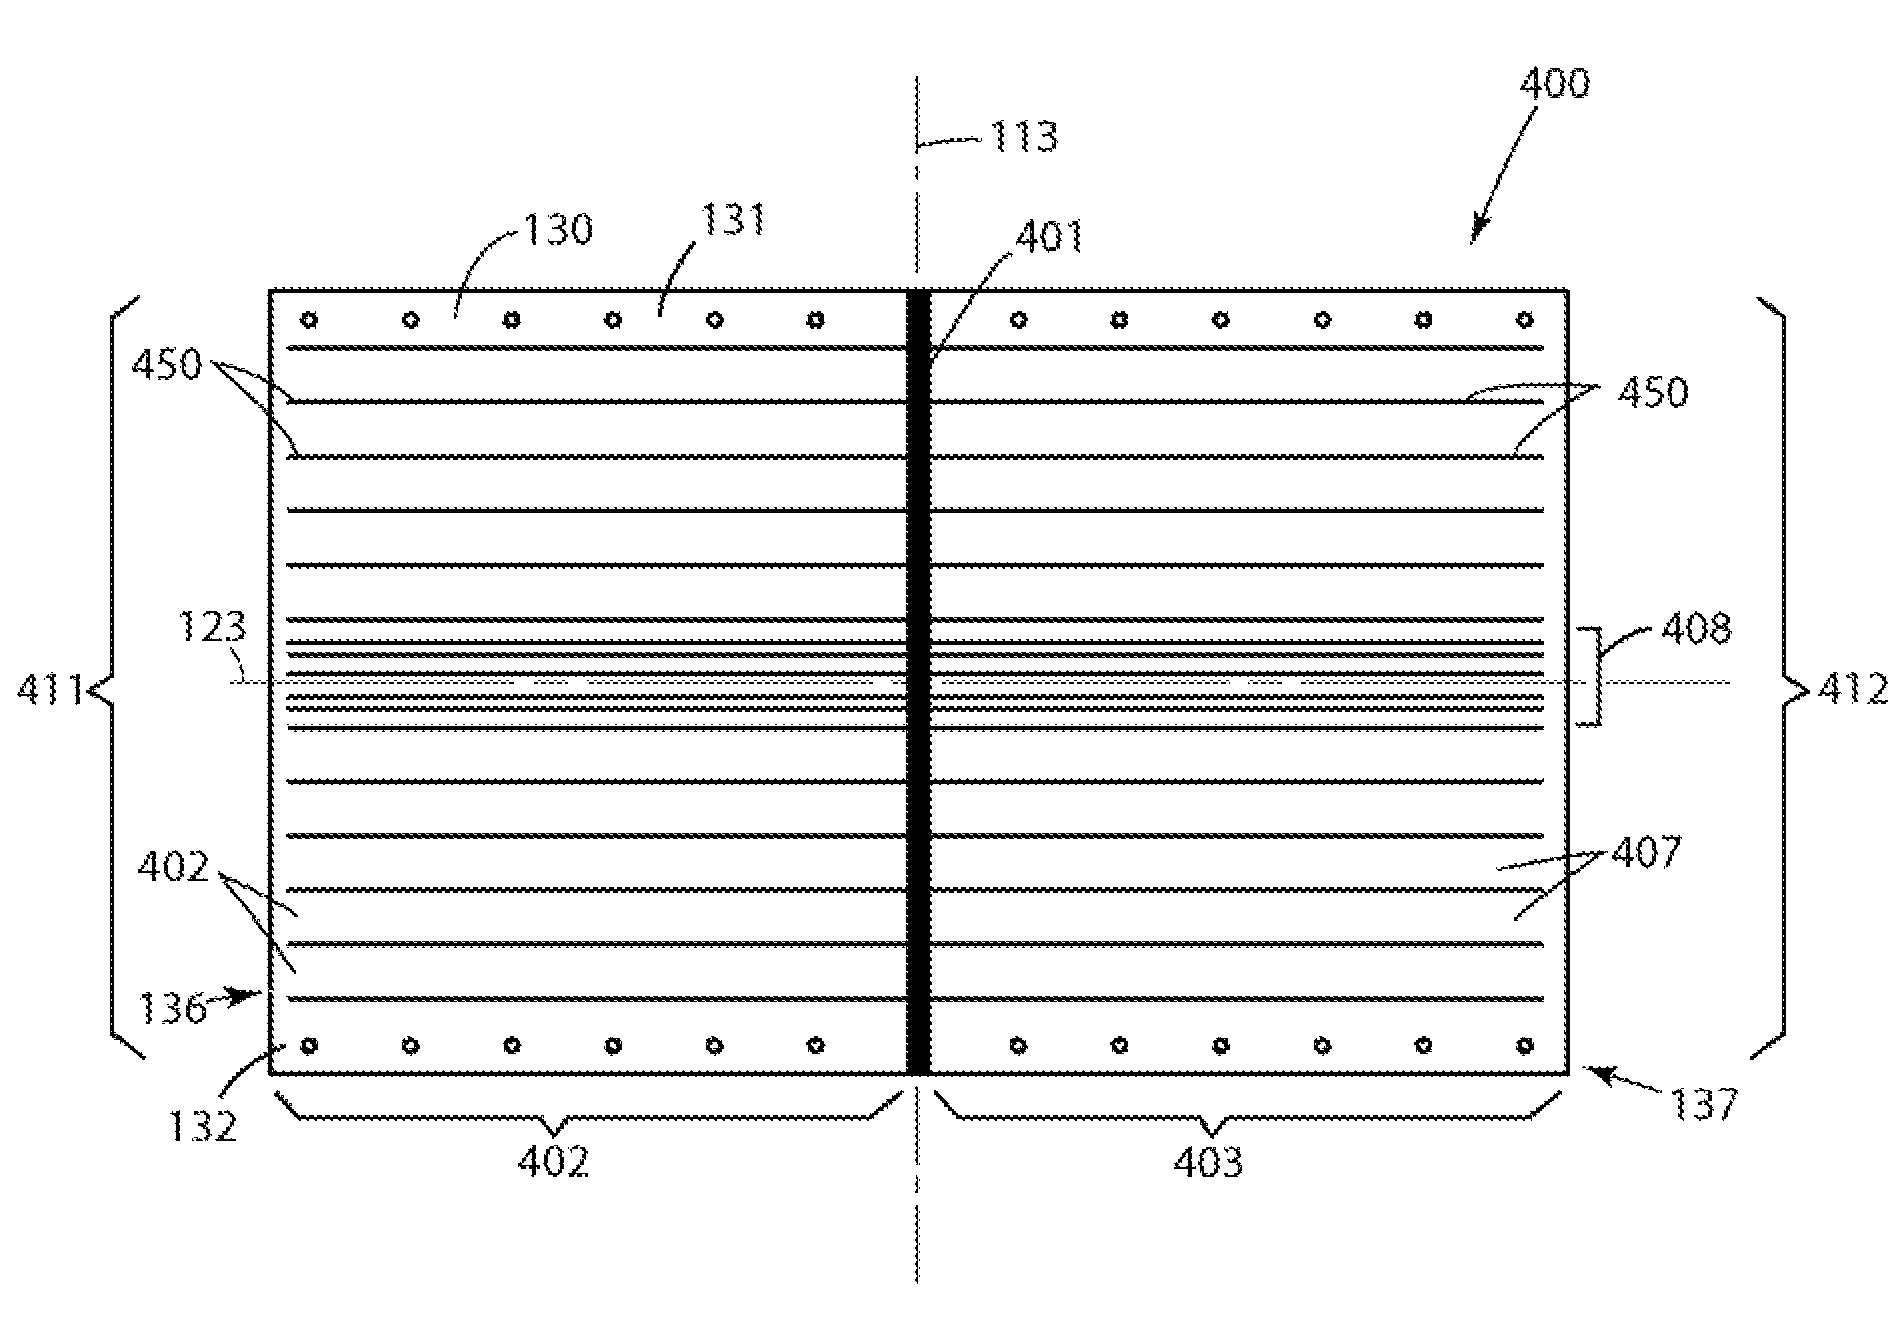 Apparatus and method for detecting metallic objects in shoes